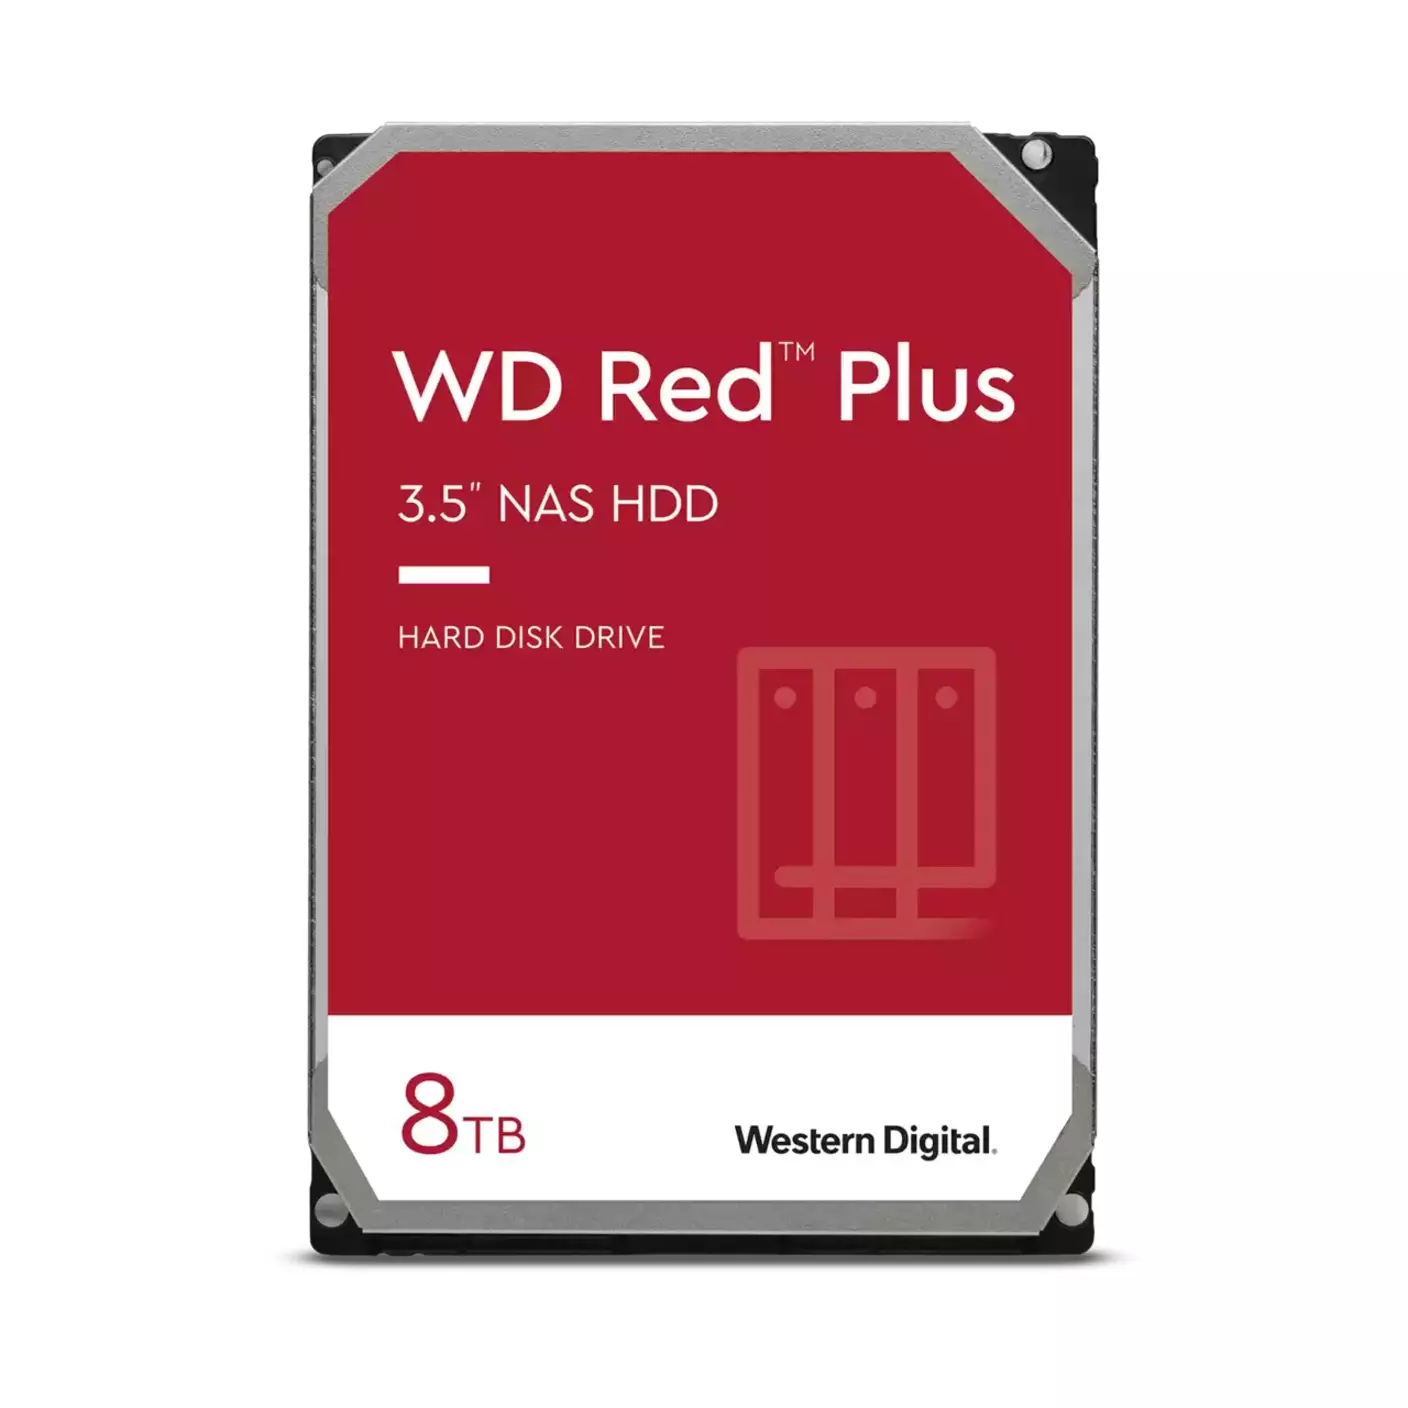 WD Red Plus 8TB NAS Desktop  Hard Disk Drive - Intellipower SATA 6 Gb/s 128 MB Cache 3.5 Inch - WD80EFZZ